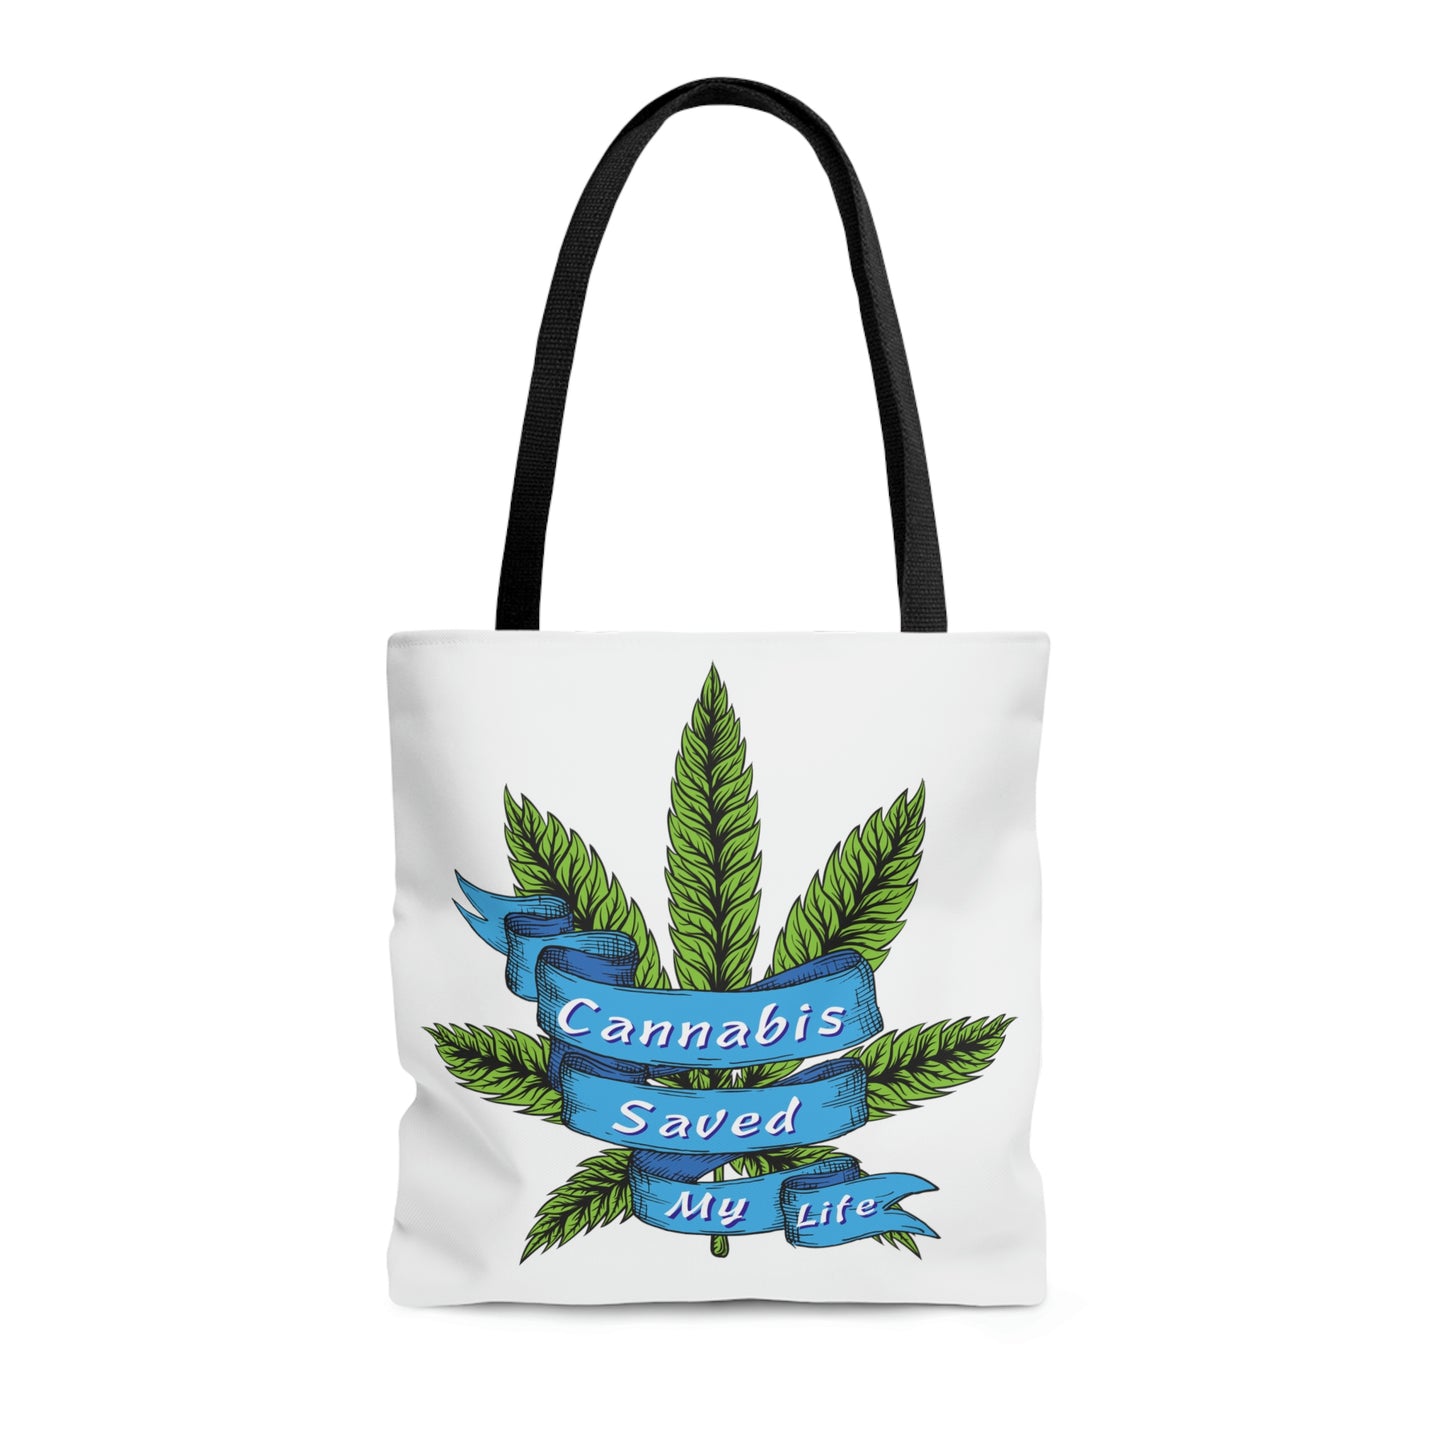 A beautiful white tote bag that has an intricate design of a cannabis leaf with the words  Cannabis Saved My Life On the Cannabis Saved my Life Tote Bag